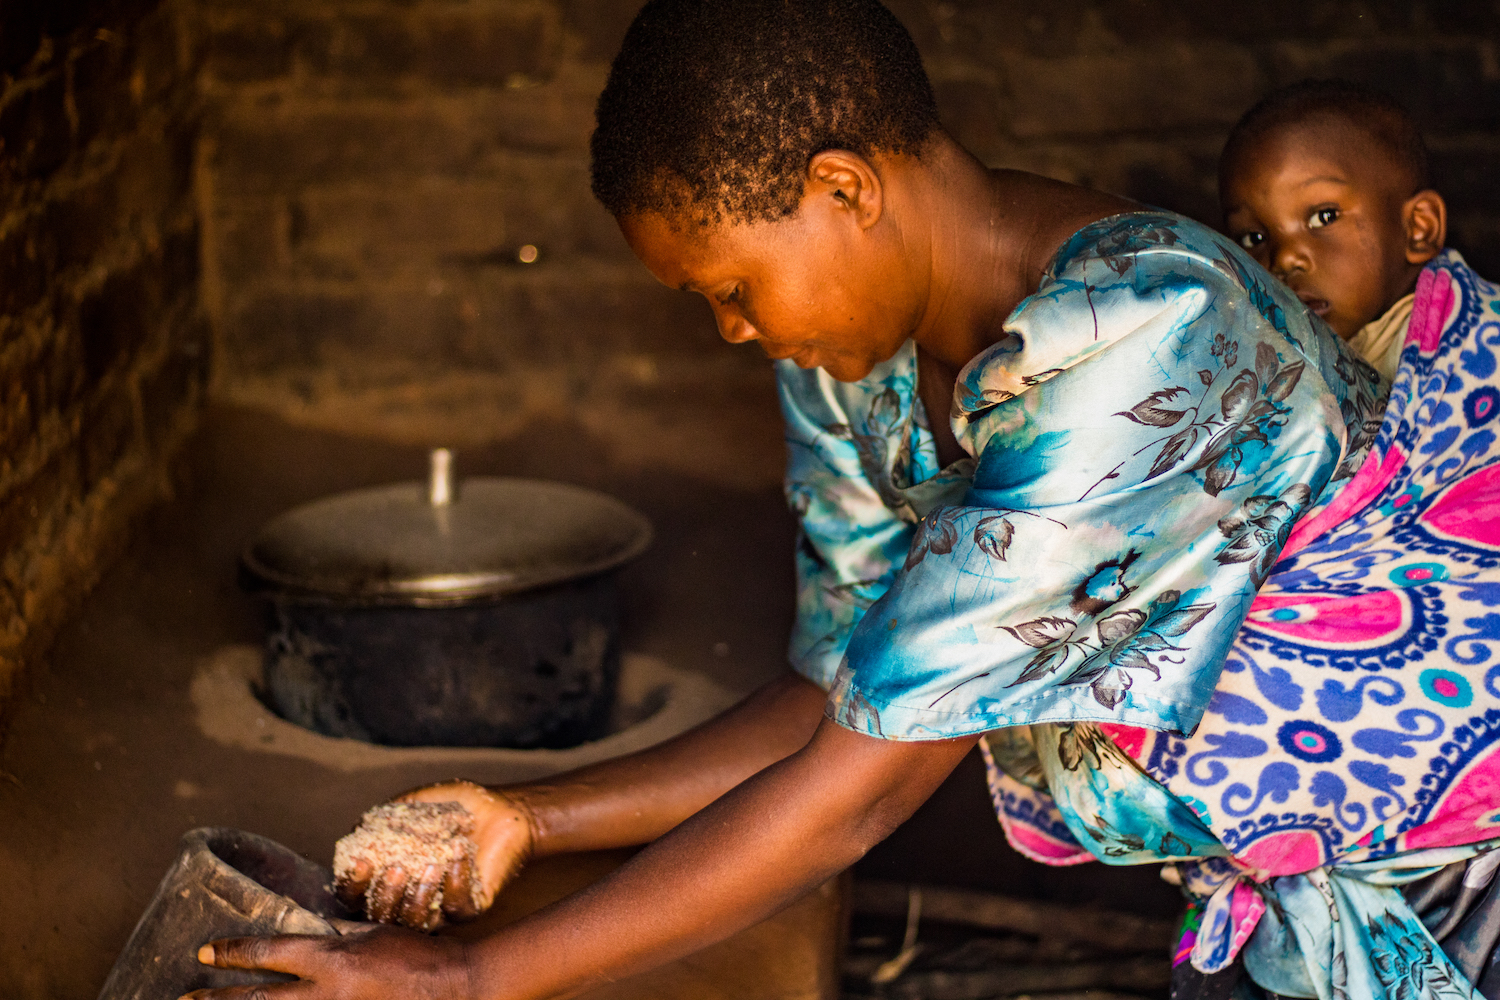  Stoves resolve the problems of an open flame, but it is important for Harriet and the rest of the staff to ensure people are using their stoves properly to prevent women and children from inhaling smoke. 